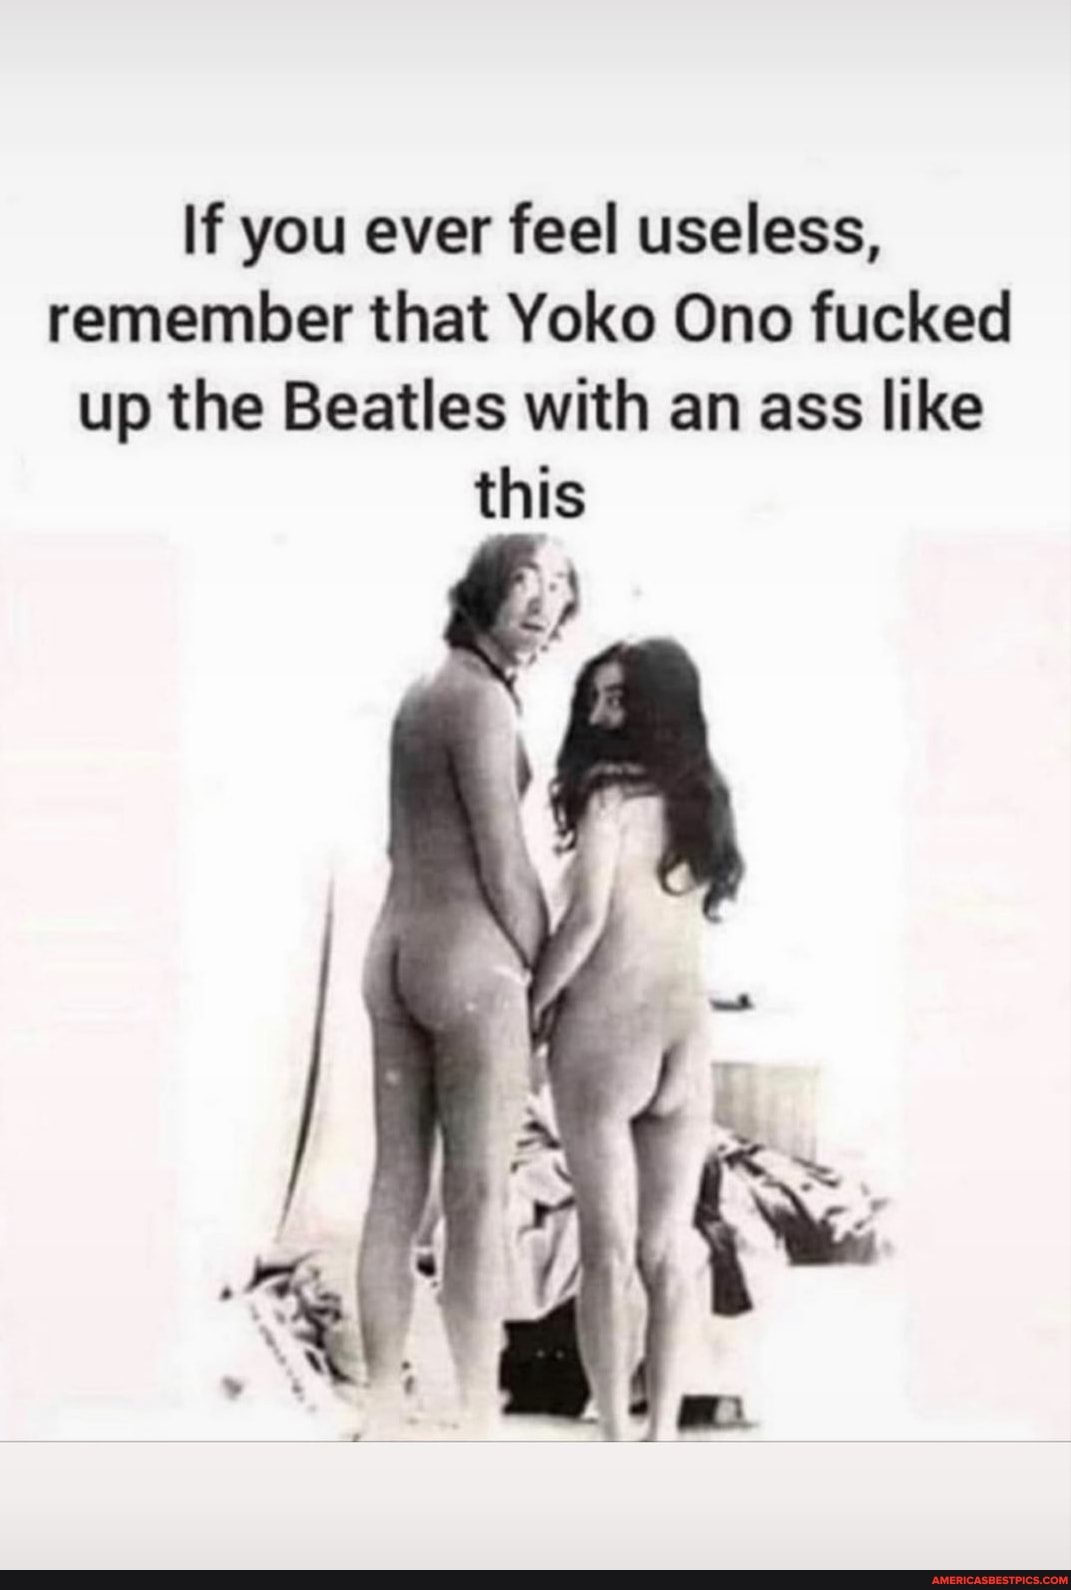 If you ever feel useless, remember that Yoko Ono fucked up the Beatles with...